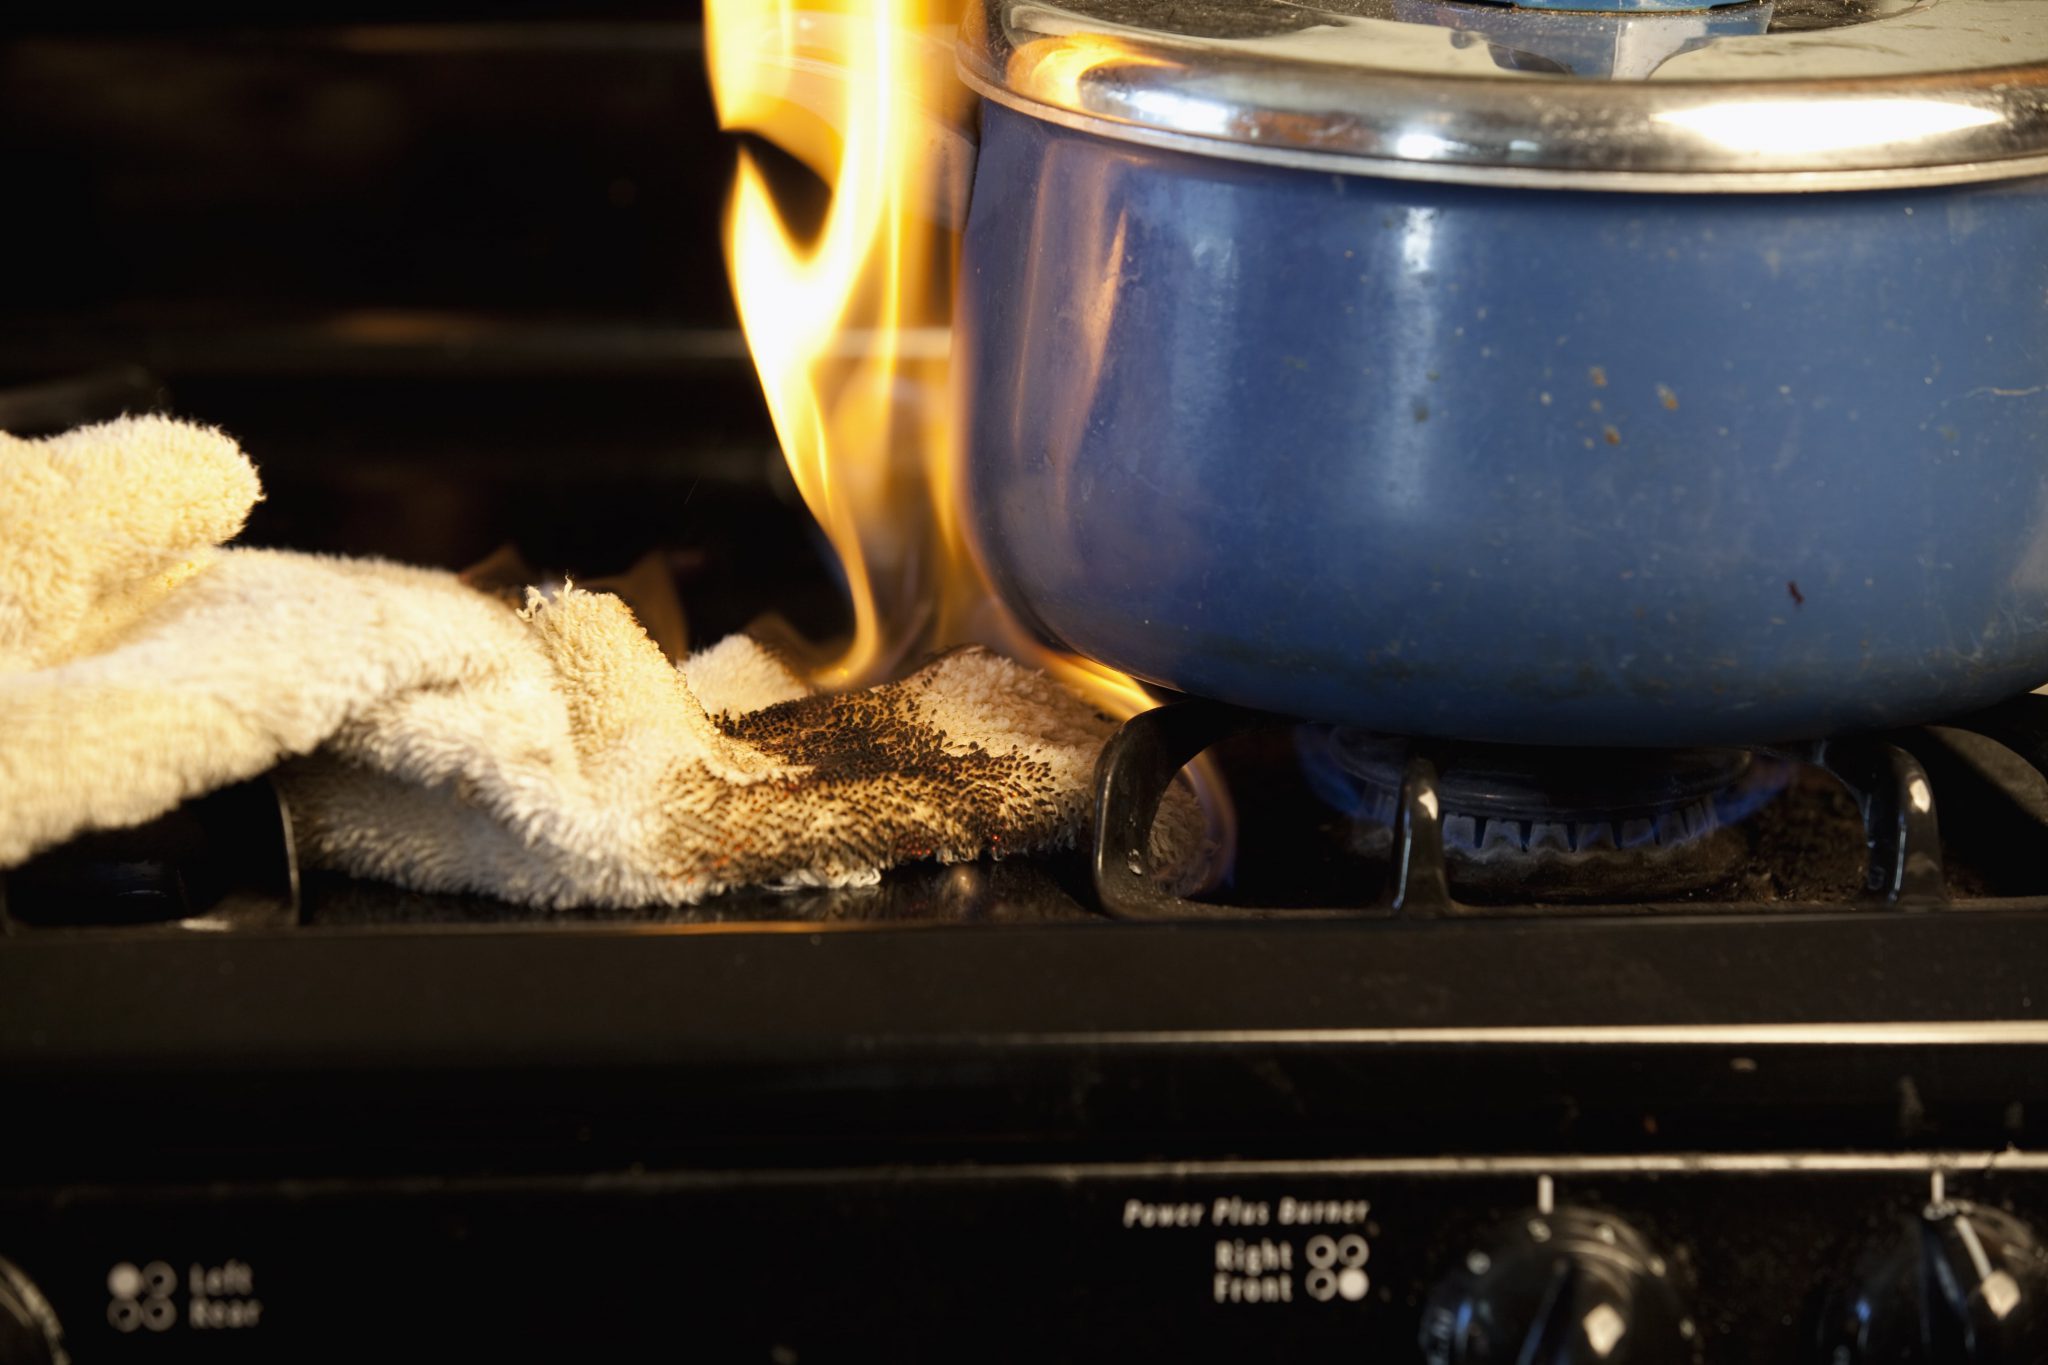 How Poor Towel Management Can Cause Restaurant Fires